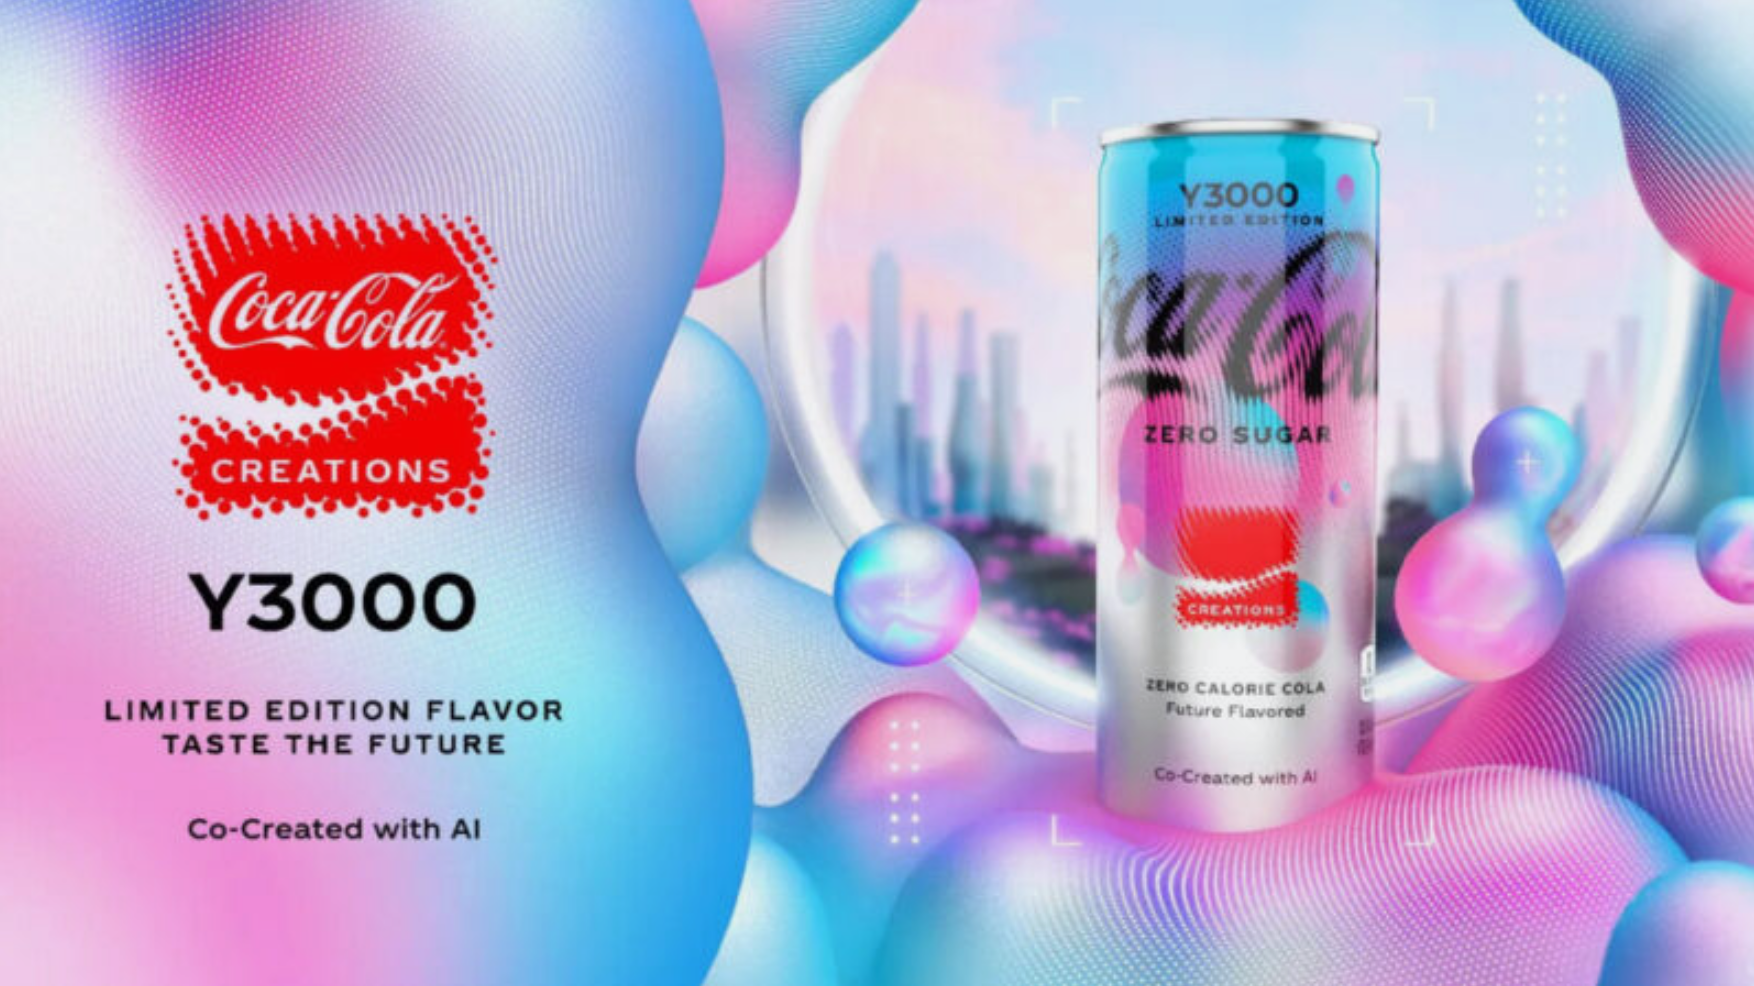 Coca-Cola unveils packaging co-created with AI